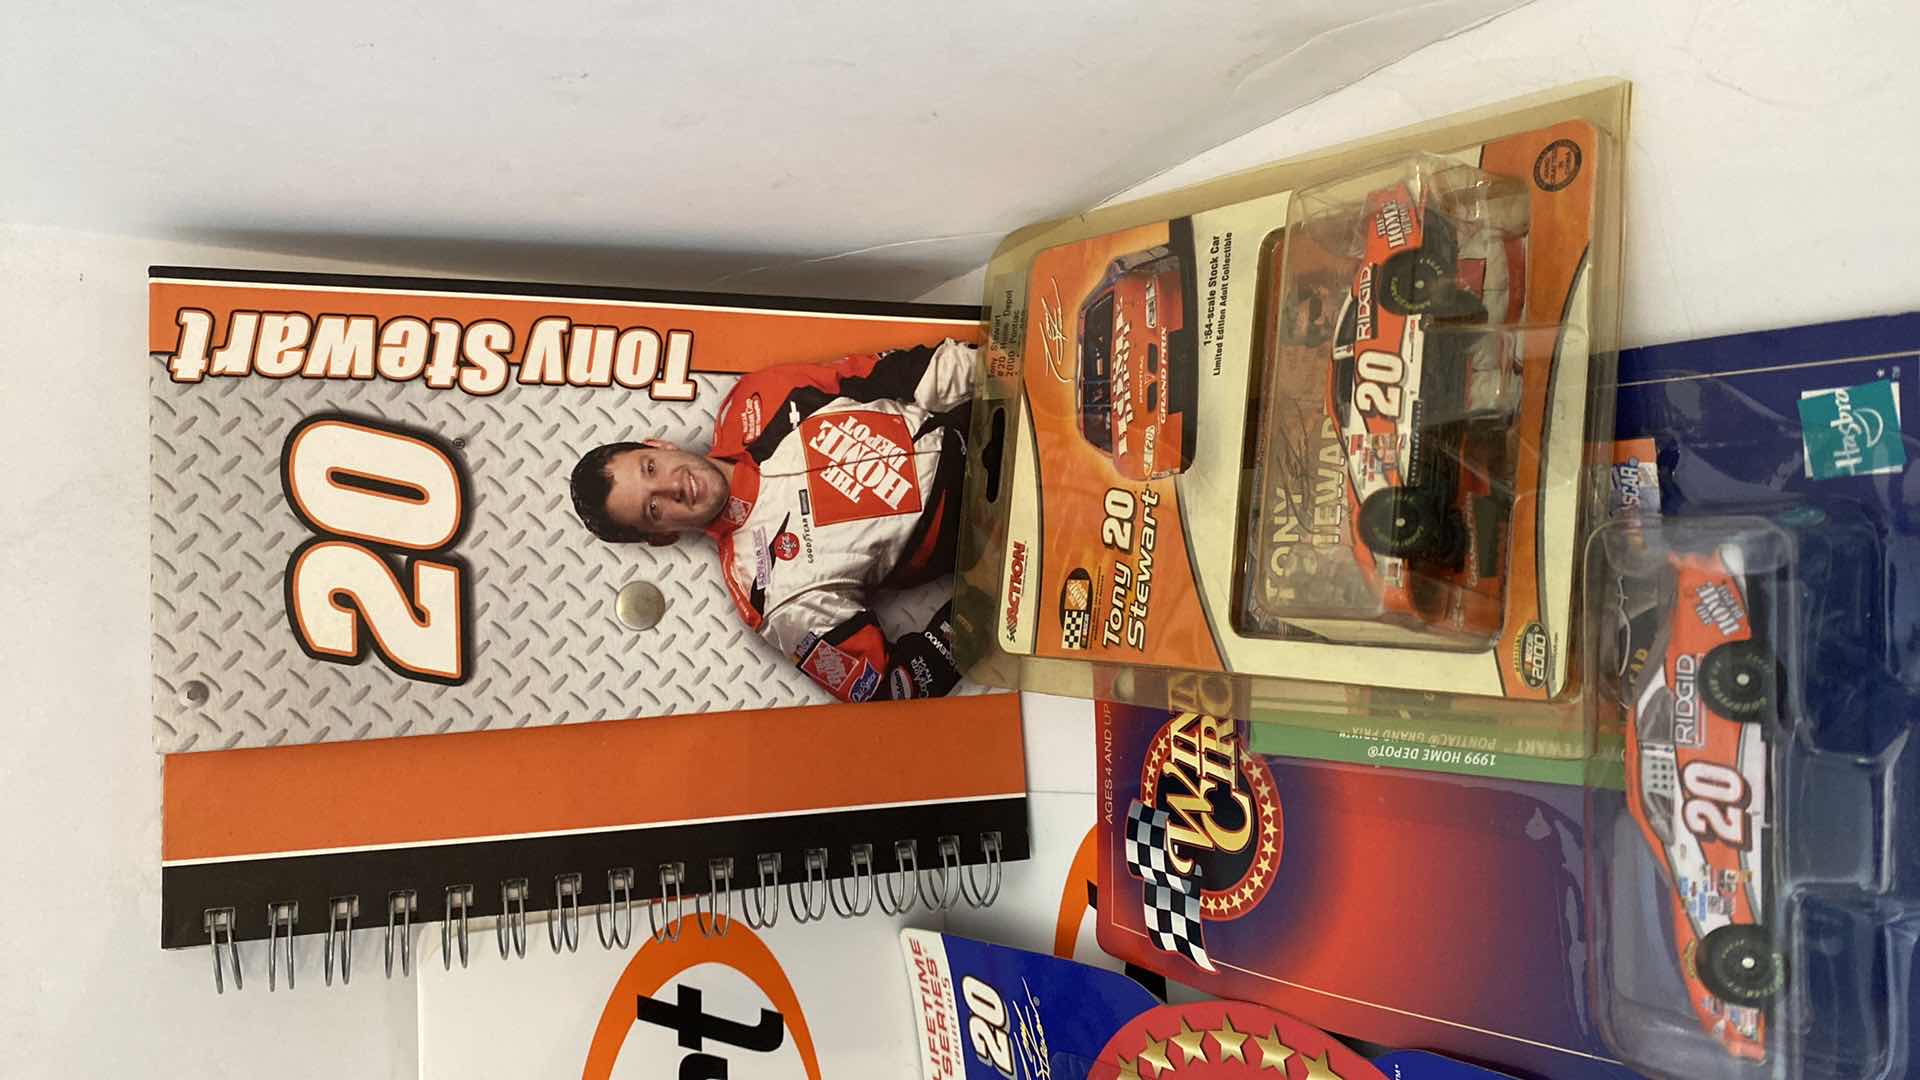 Photo 3 of TOYS - TONY STEWART RACING ASSORTMENT COLLECTIBLES